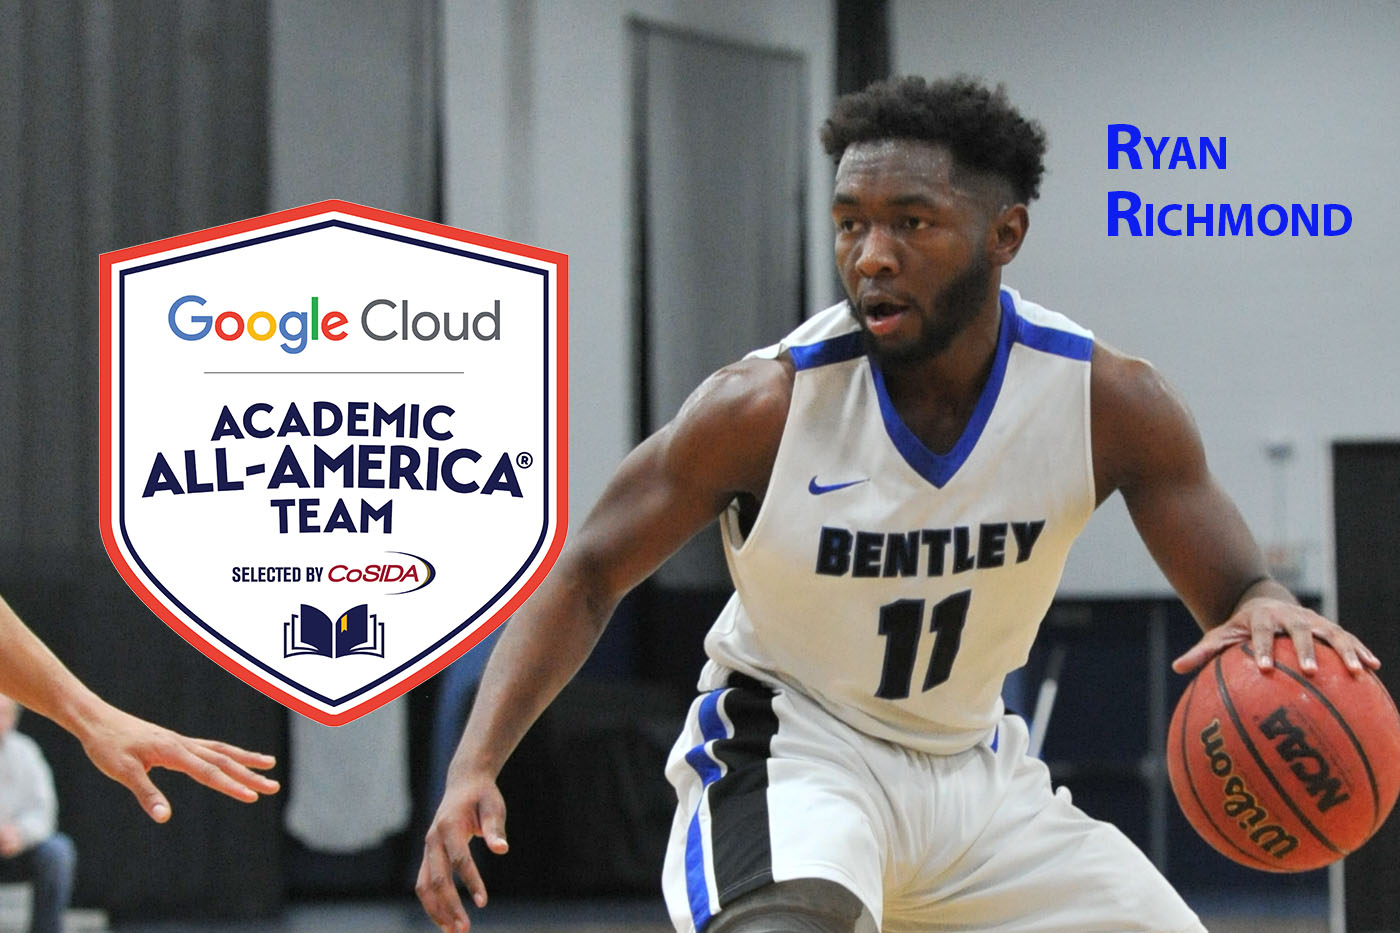 Richmond Selected for Google Cloud Academic All-America Honors